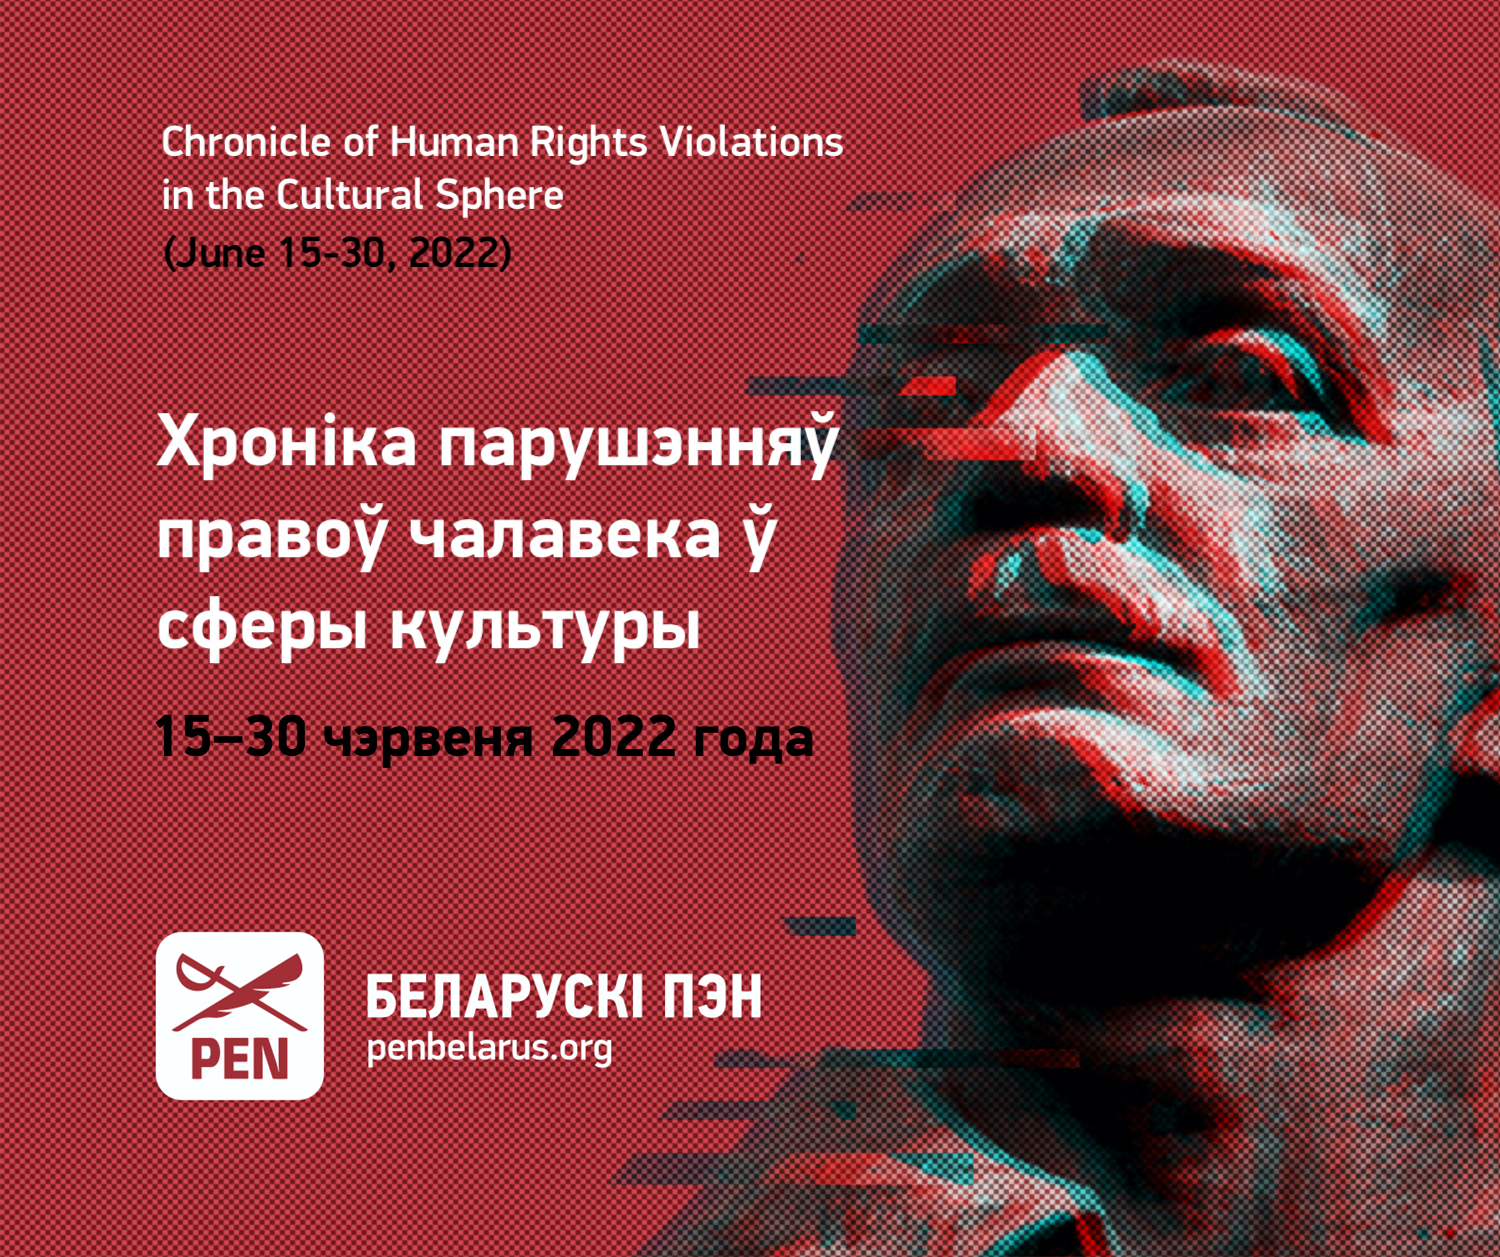 Chronicle of Human Rights Violations in the Cultural Sphere (June 15-30, 2022)